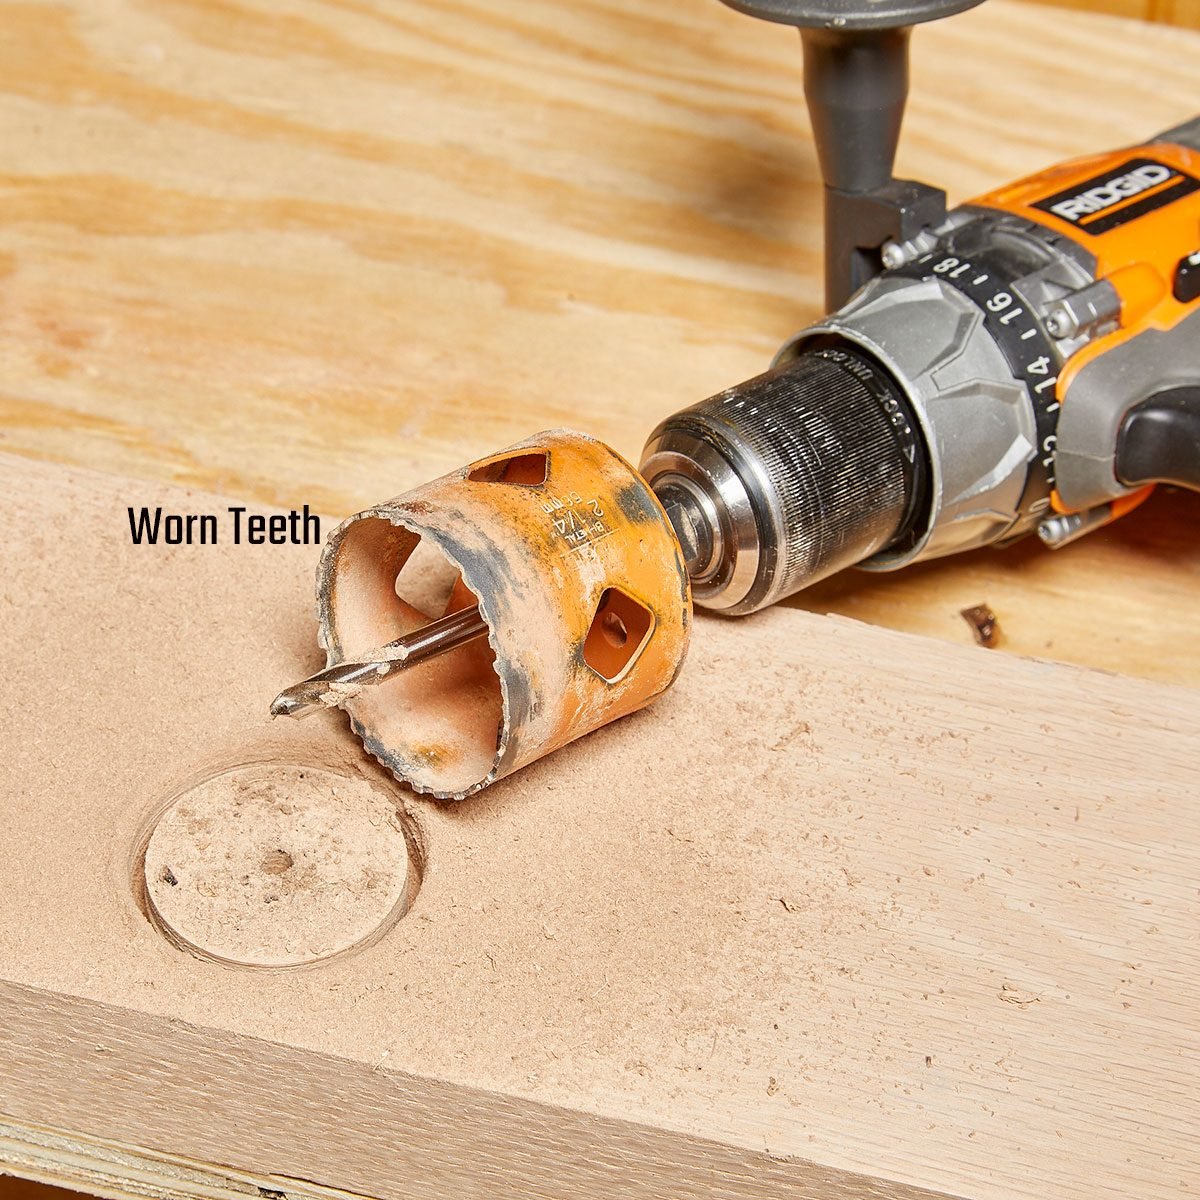 A hole saw with worn-out teeth | Construction Pro Tips